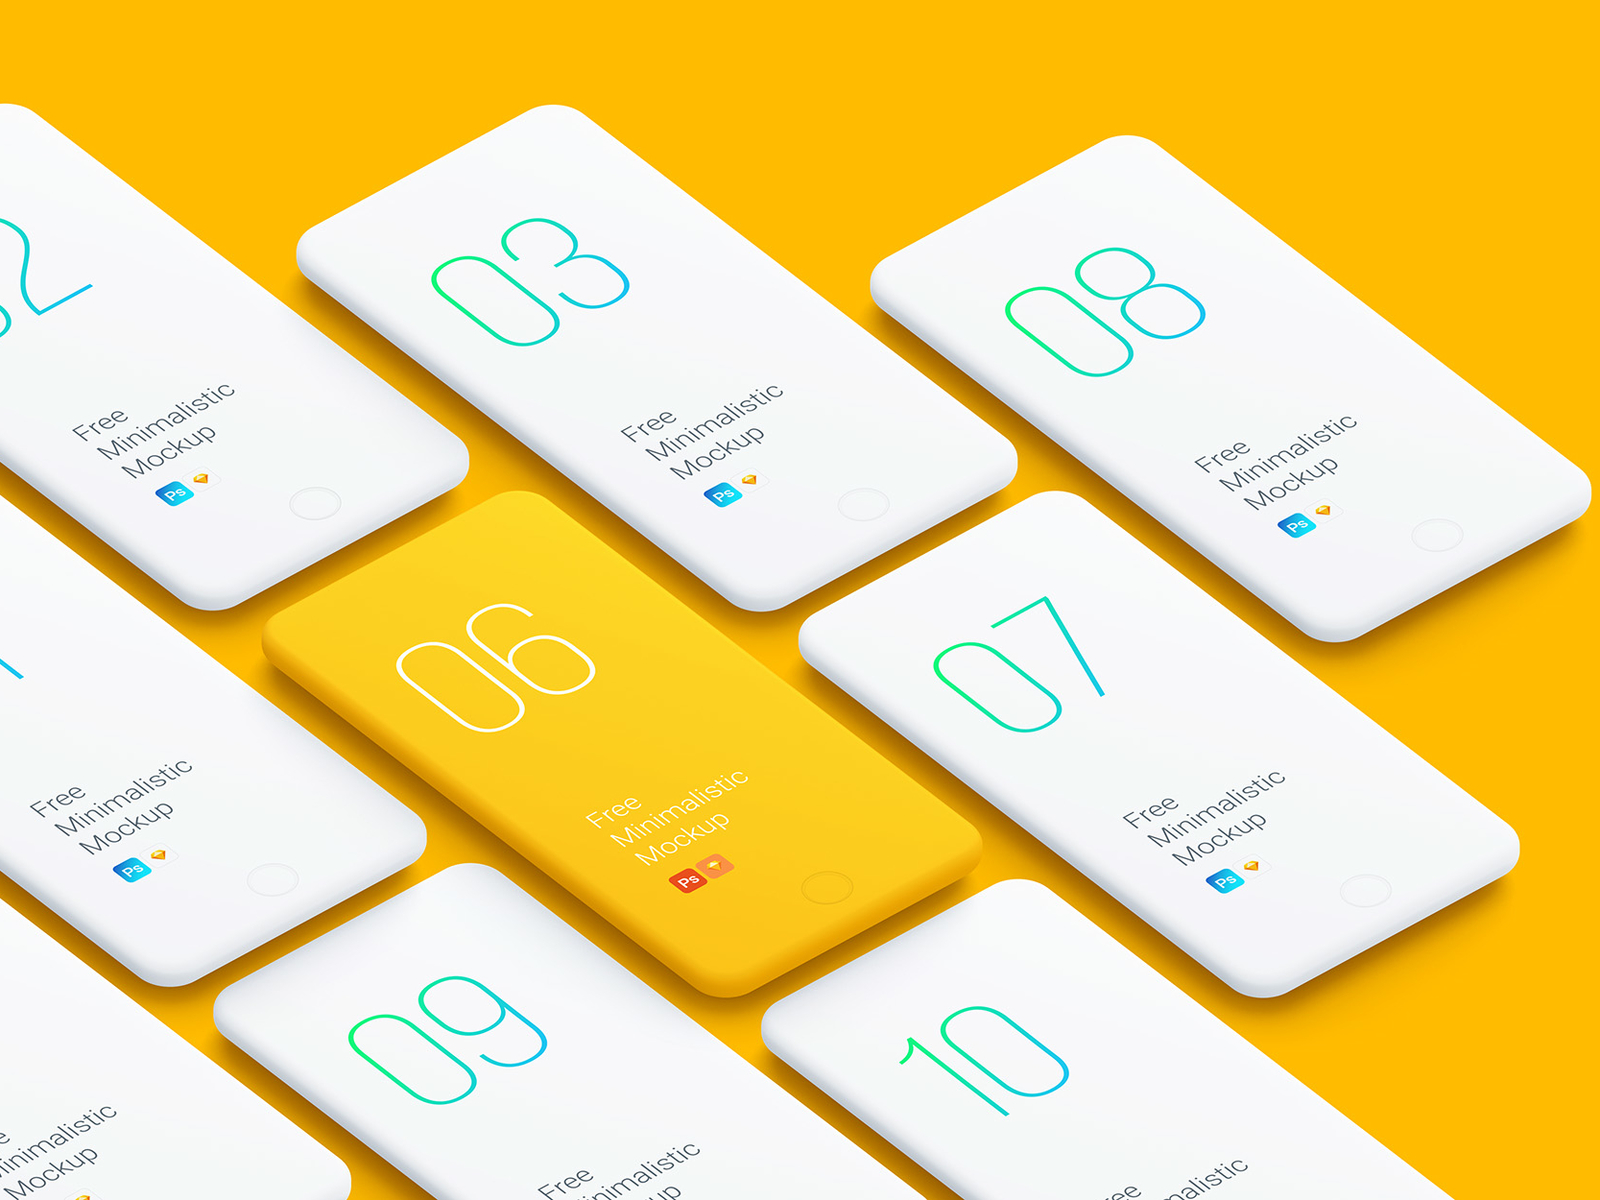 Download Free Minimalistic Phone Mockups by dazzler software on Dribbble